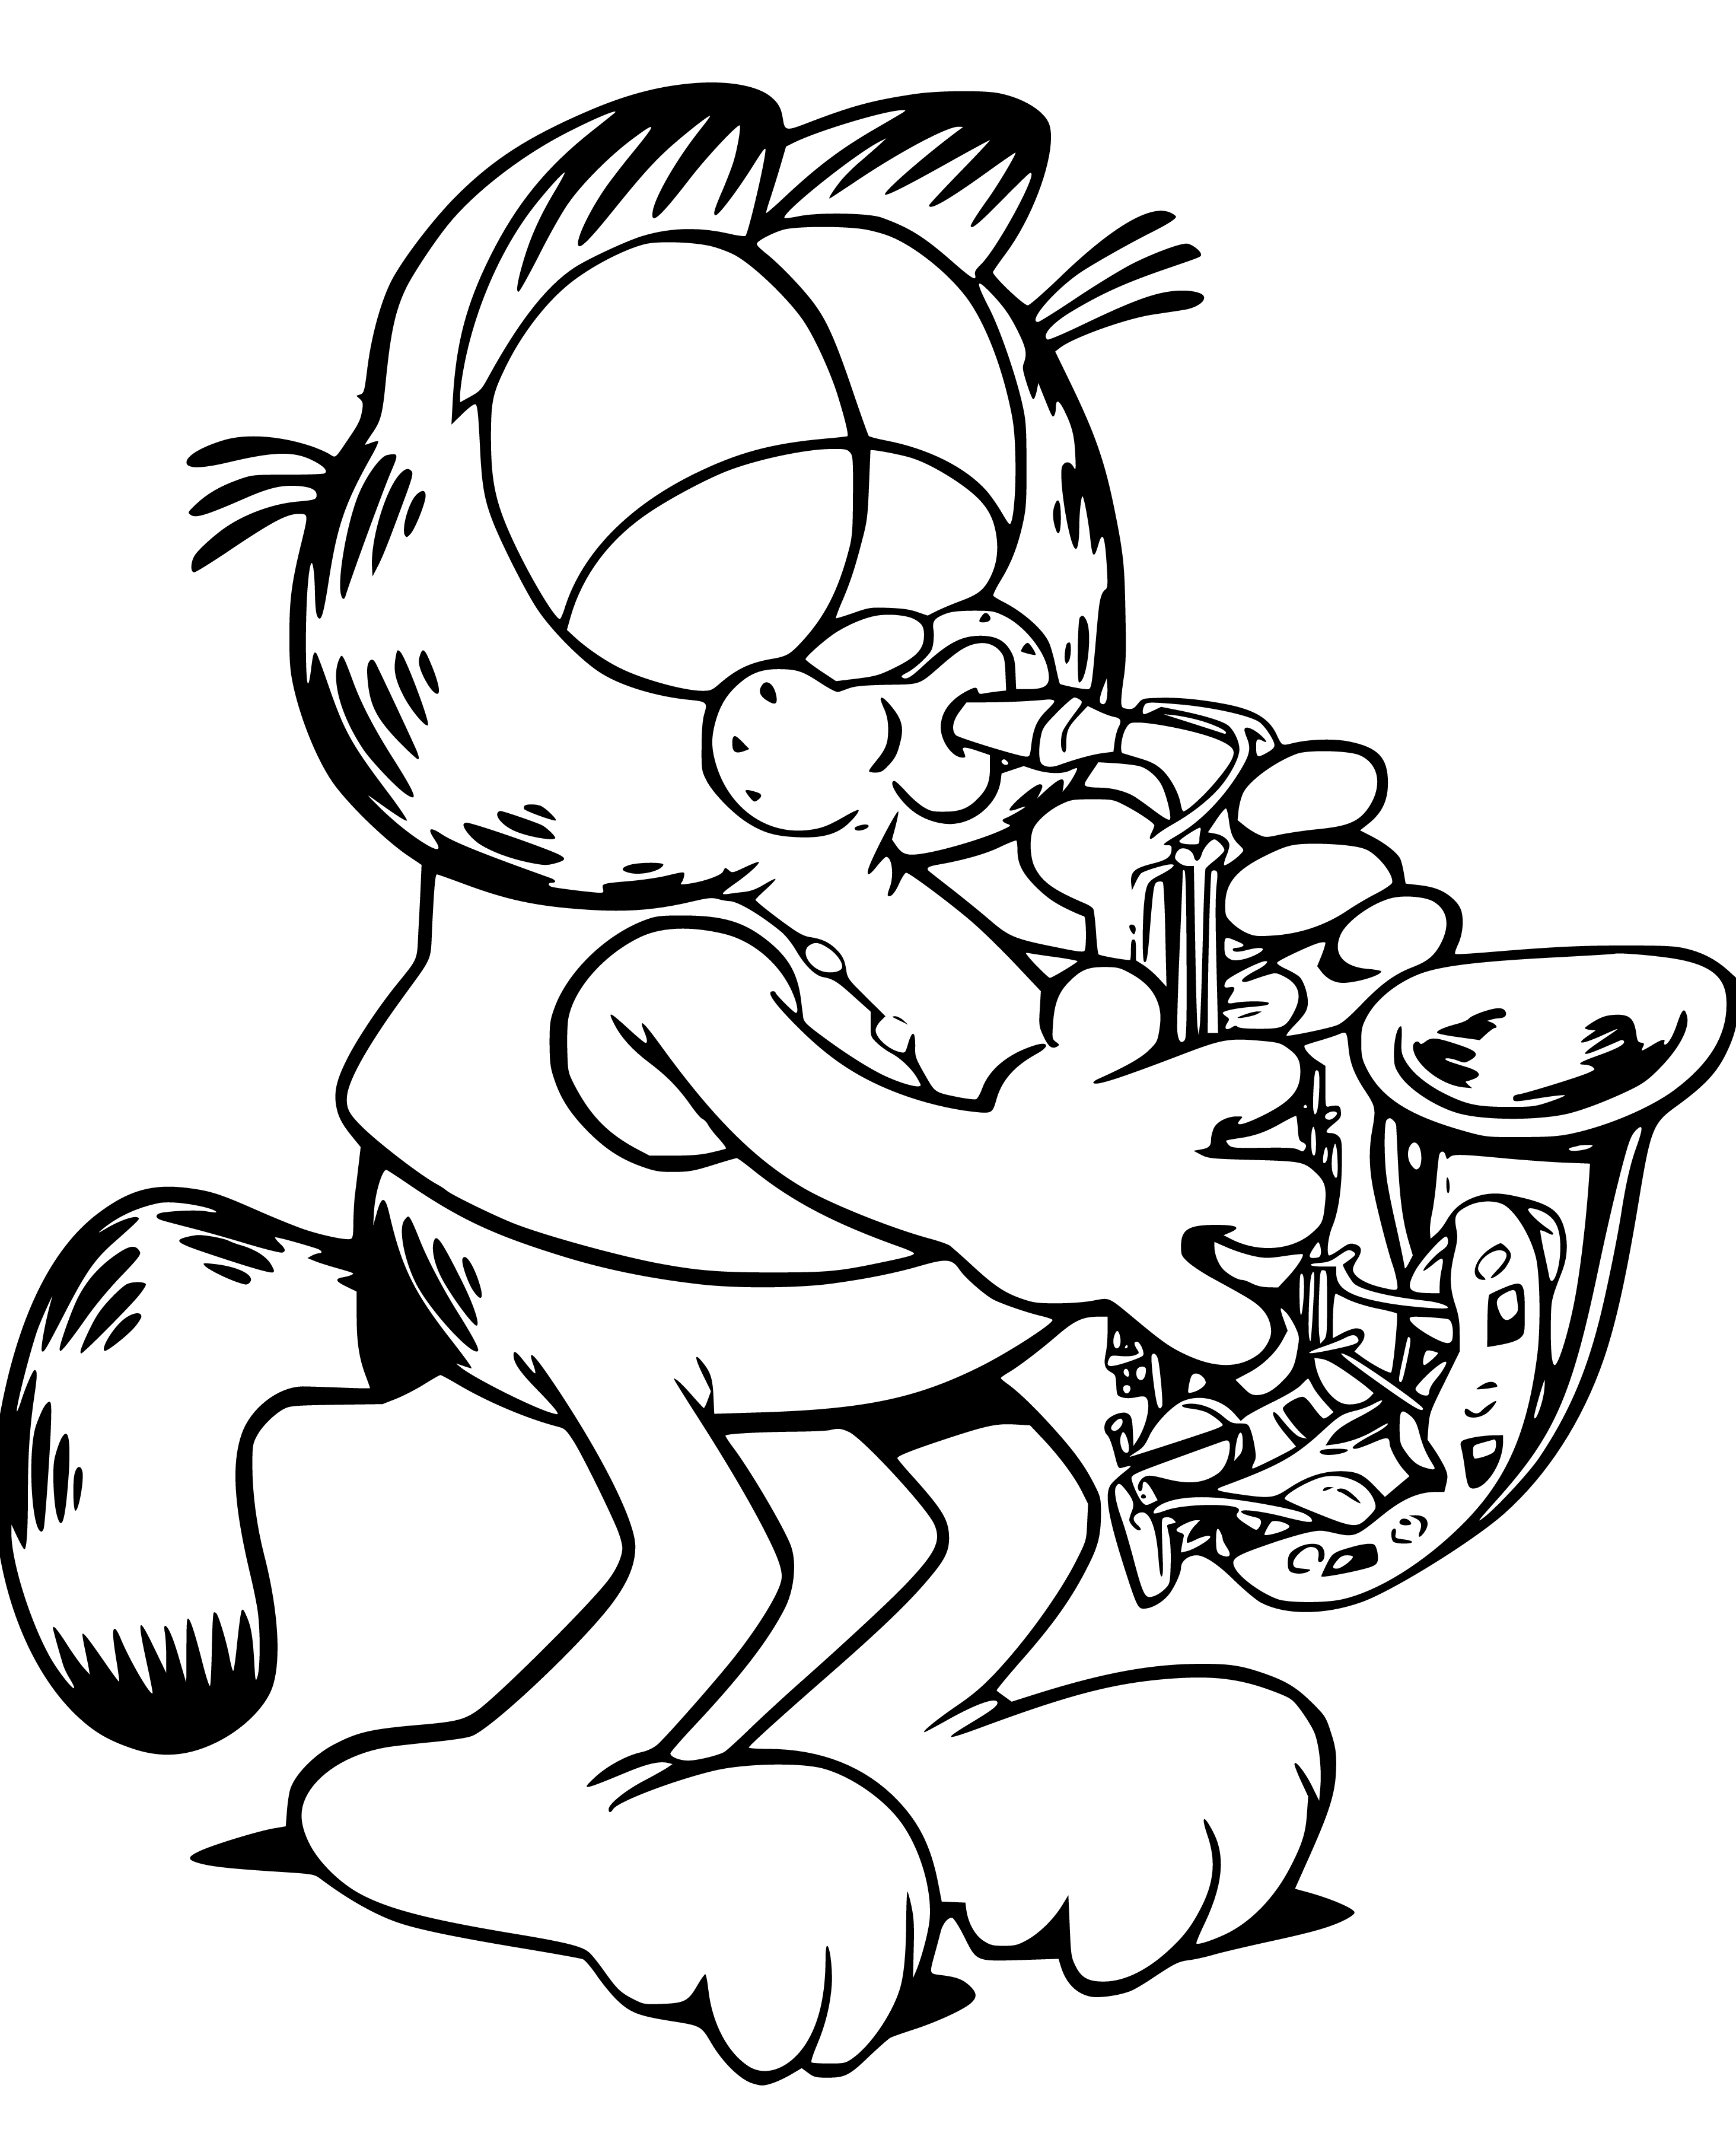 Garfield Coloring Pages 9